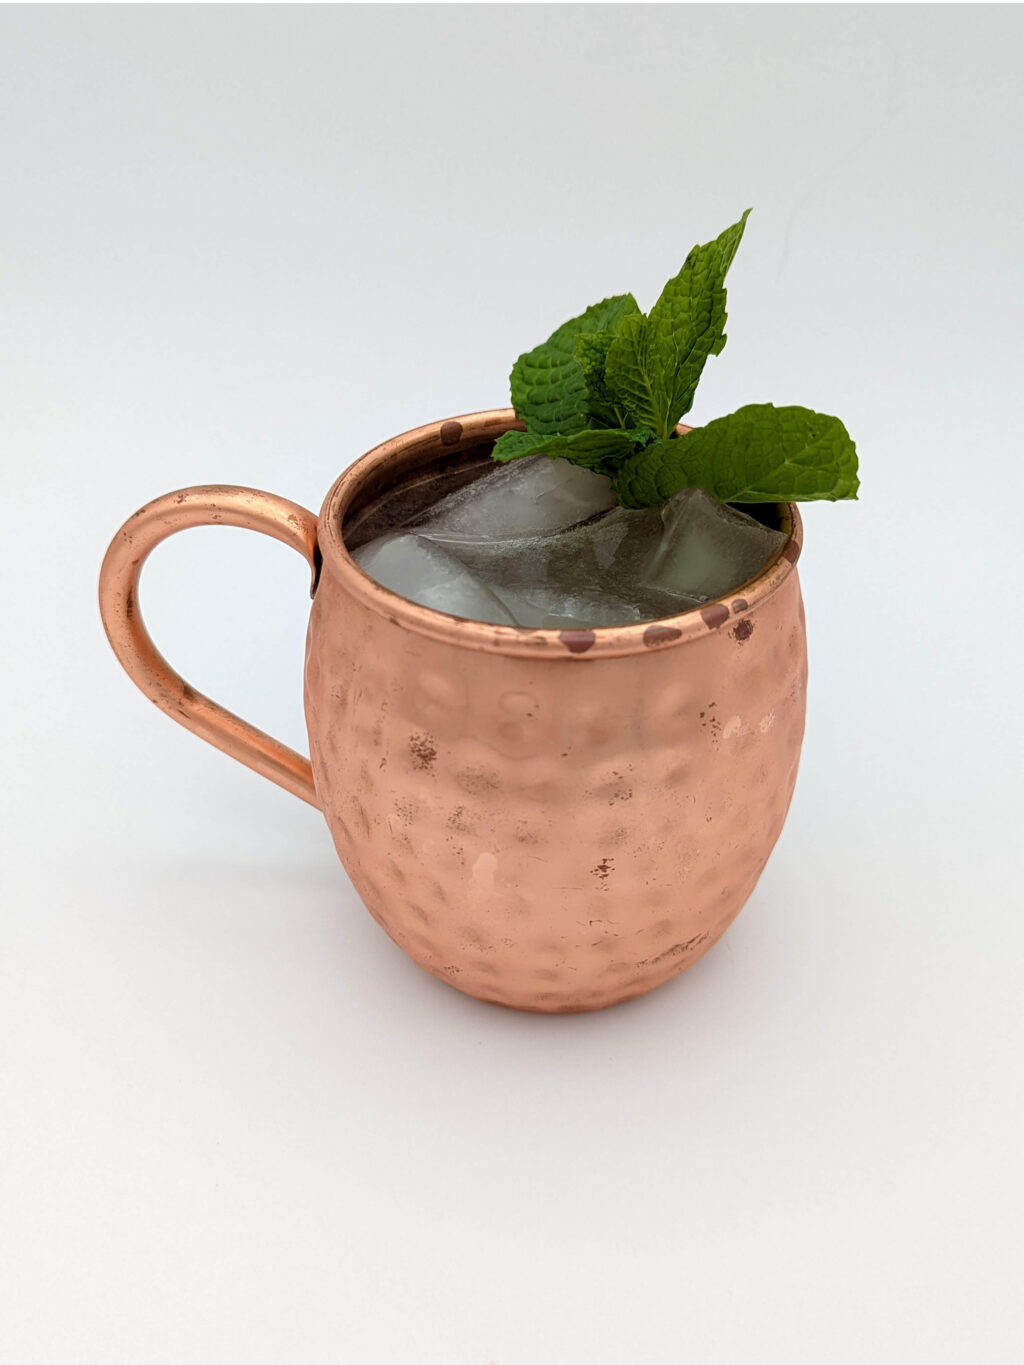 Fizzy liquid and ice in a copper mug with a sprig of mint as garnish